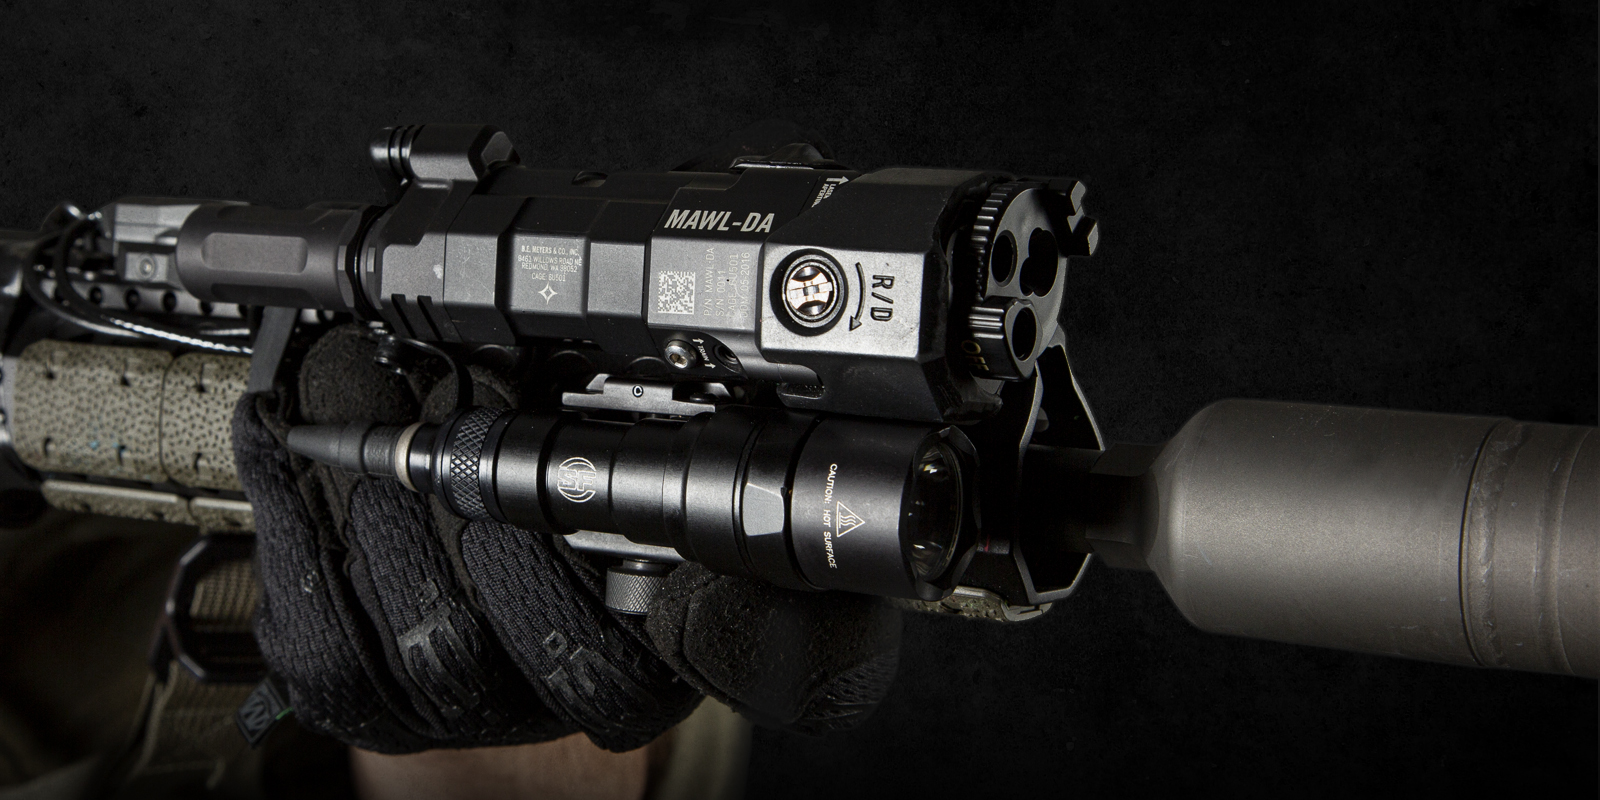 UPDATE: DSS PROCURES OVER 3,600 B.E. MEYERS & CO. MAWL-DA'S FOR PRIMARY NIR WEAPON LASER